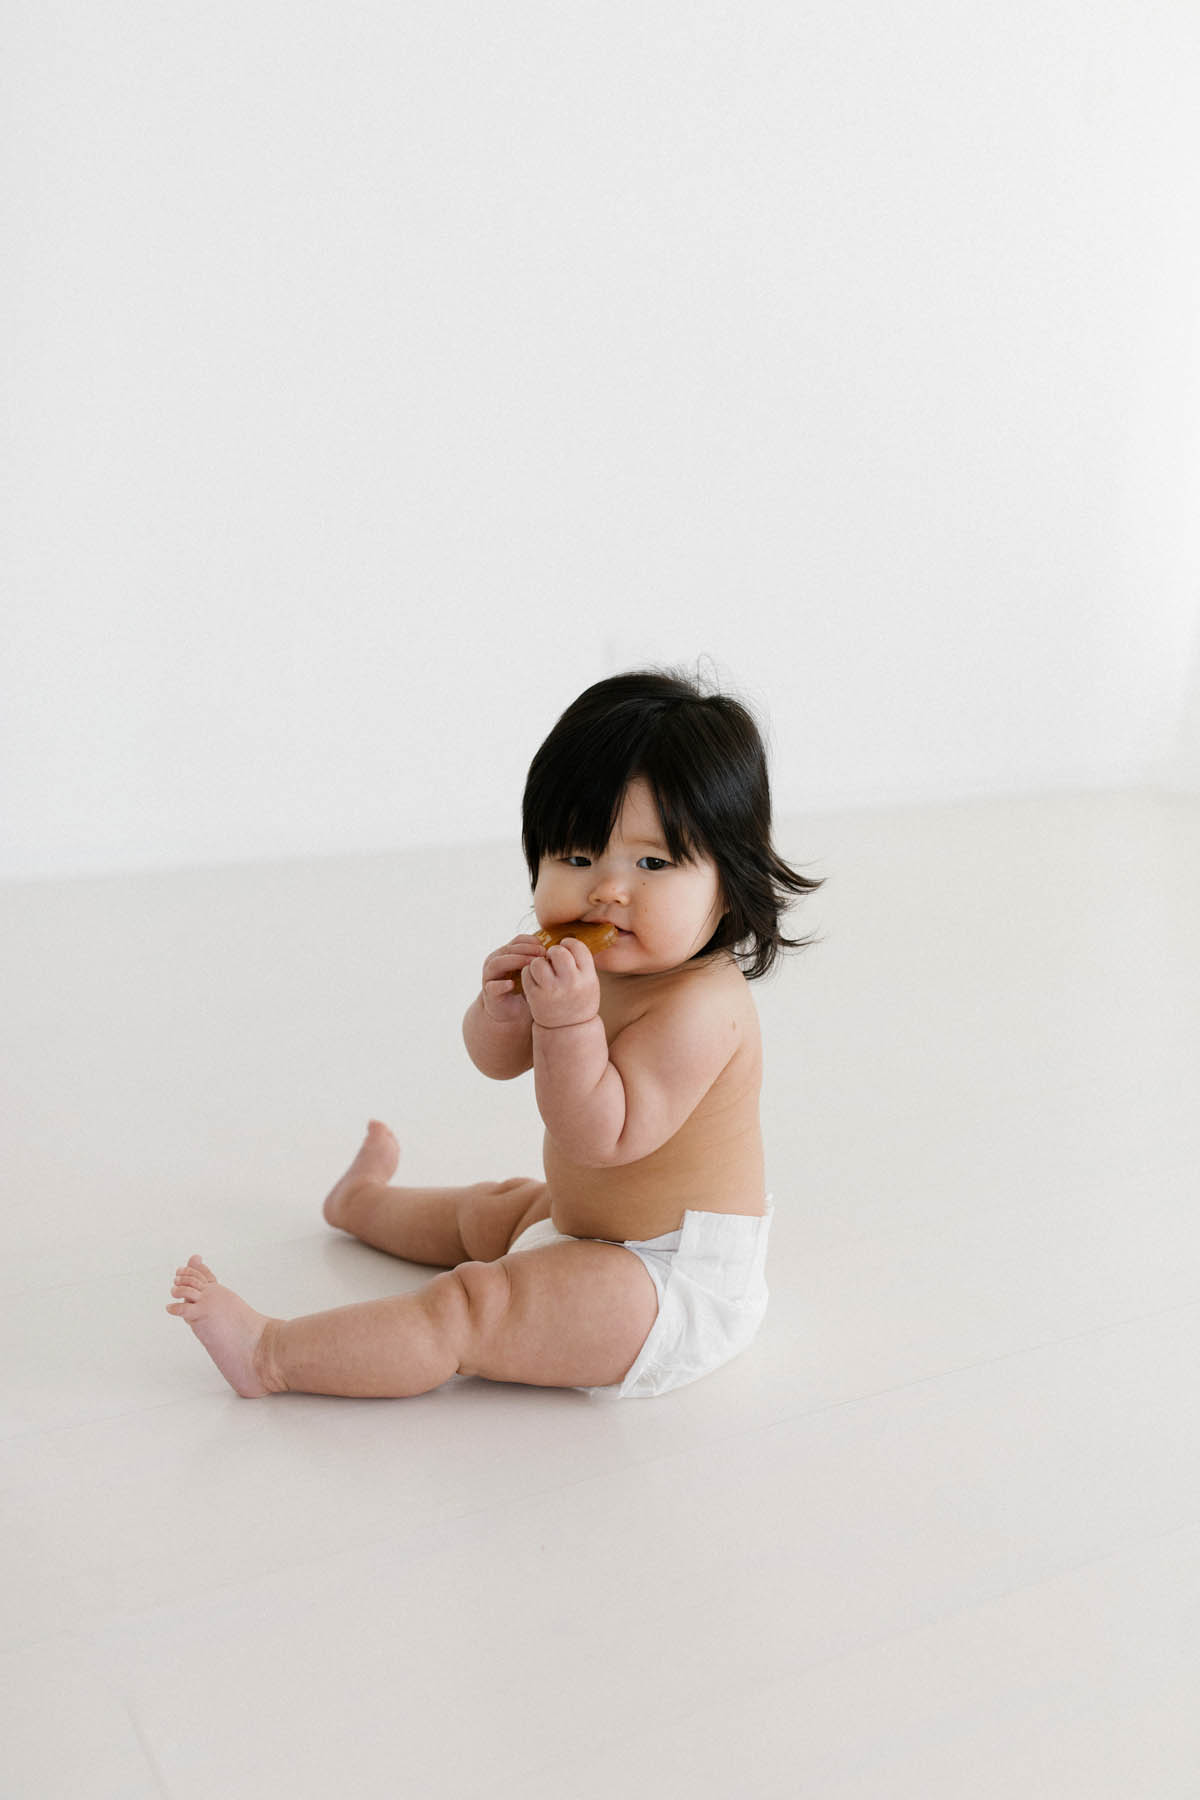 baby girl sitting on the floor chewing on a baby teether